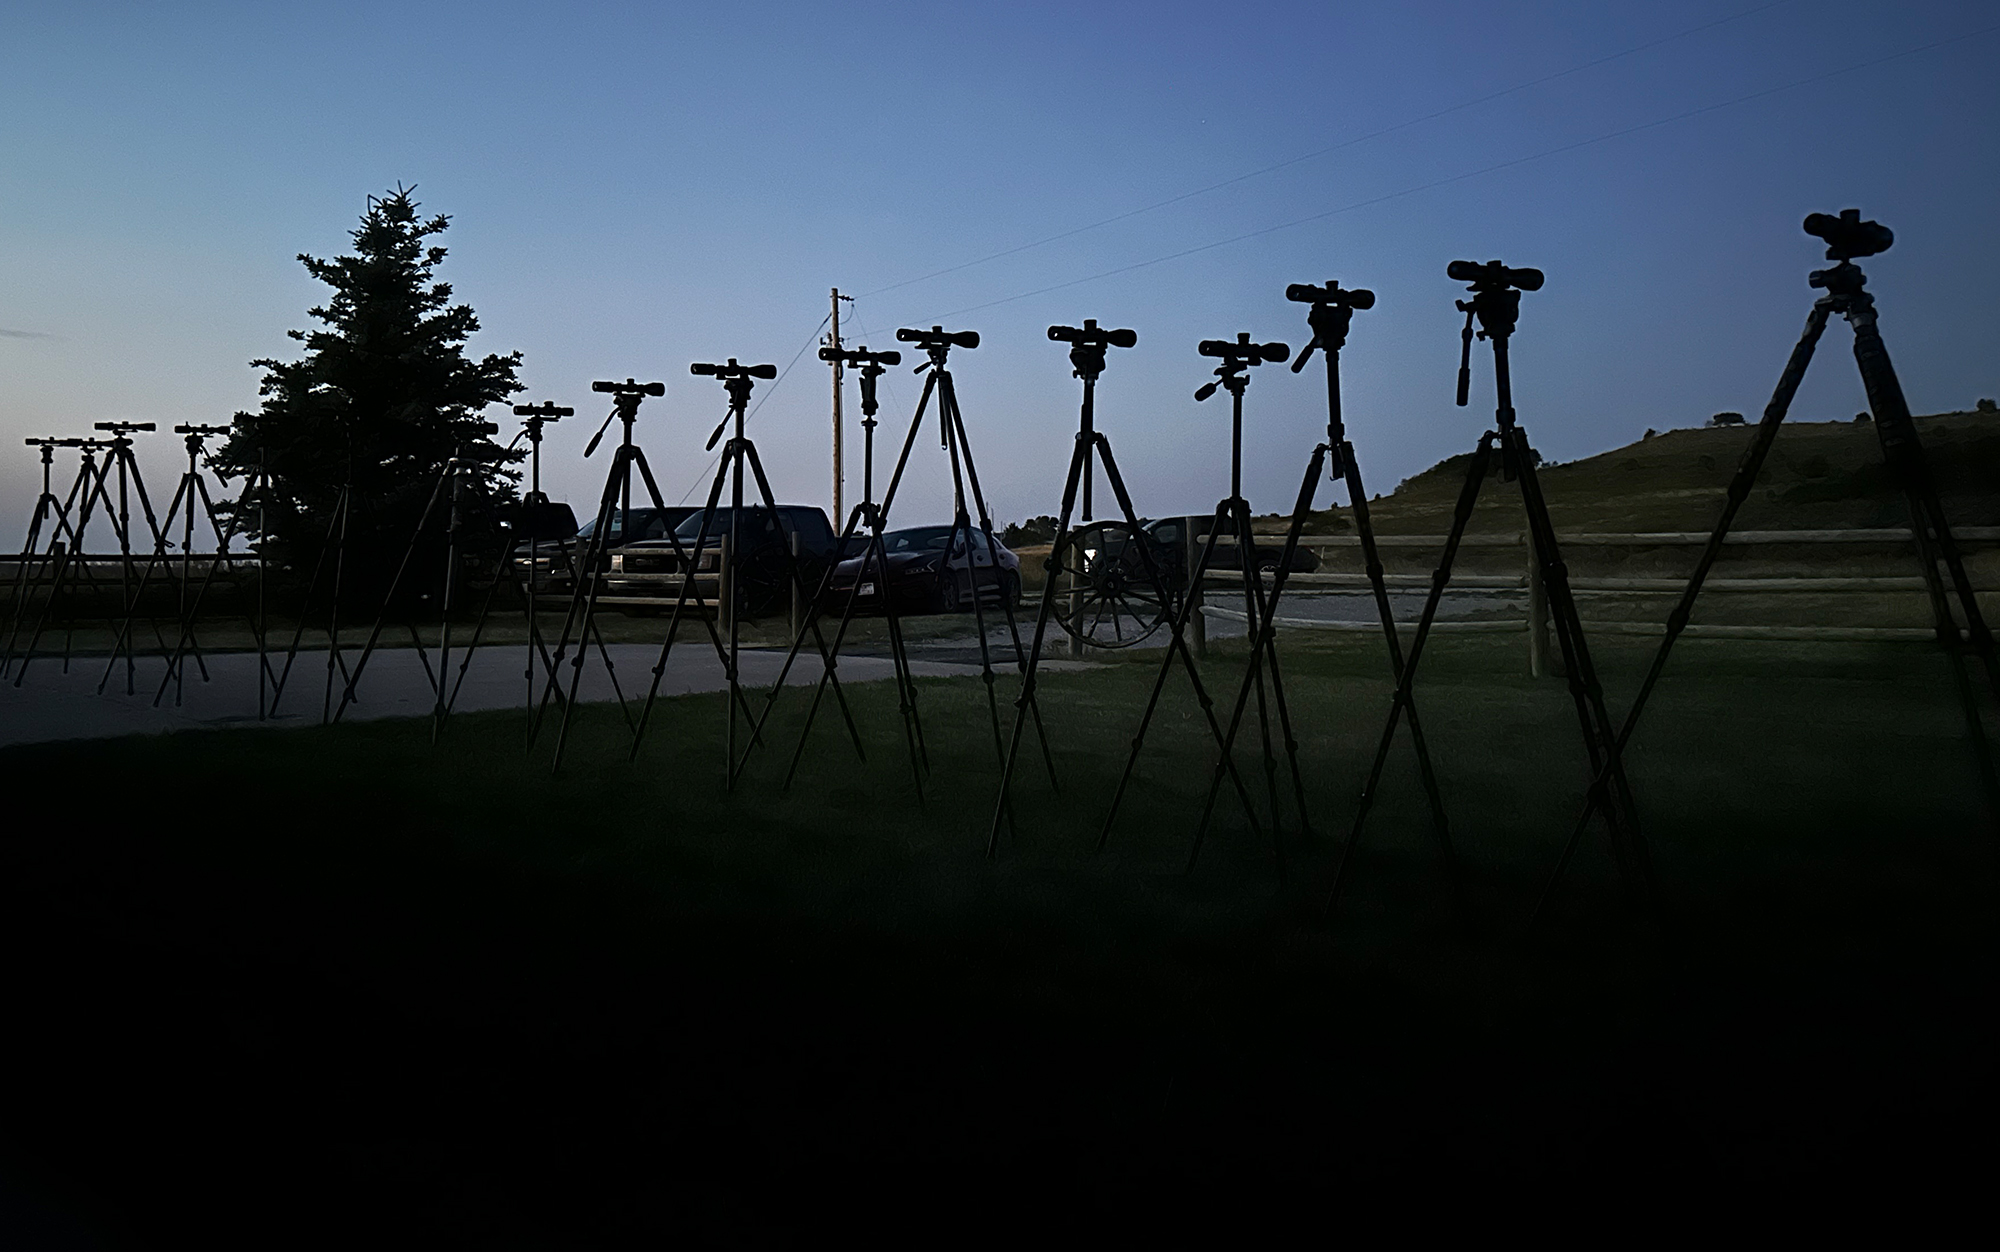 The best long range scopes were tested in low light.